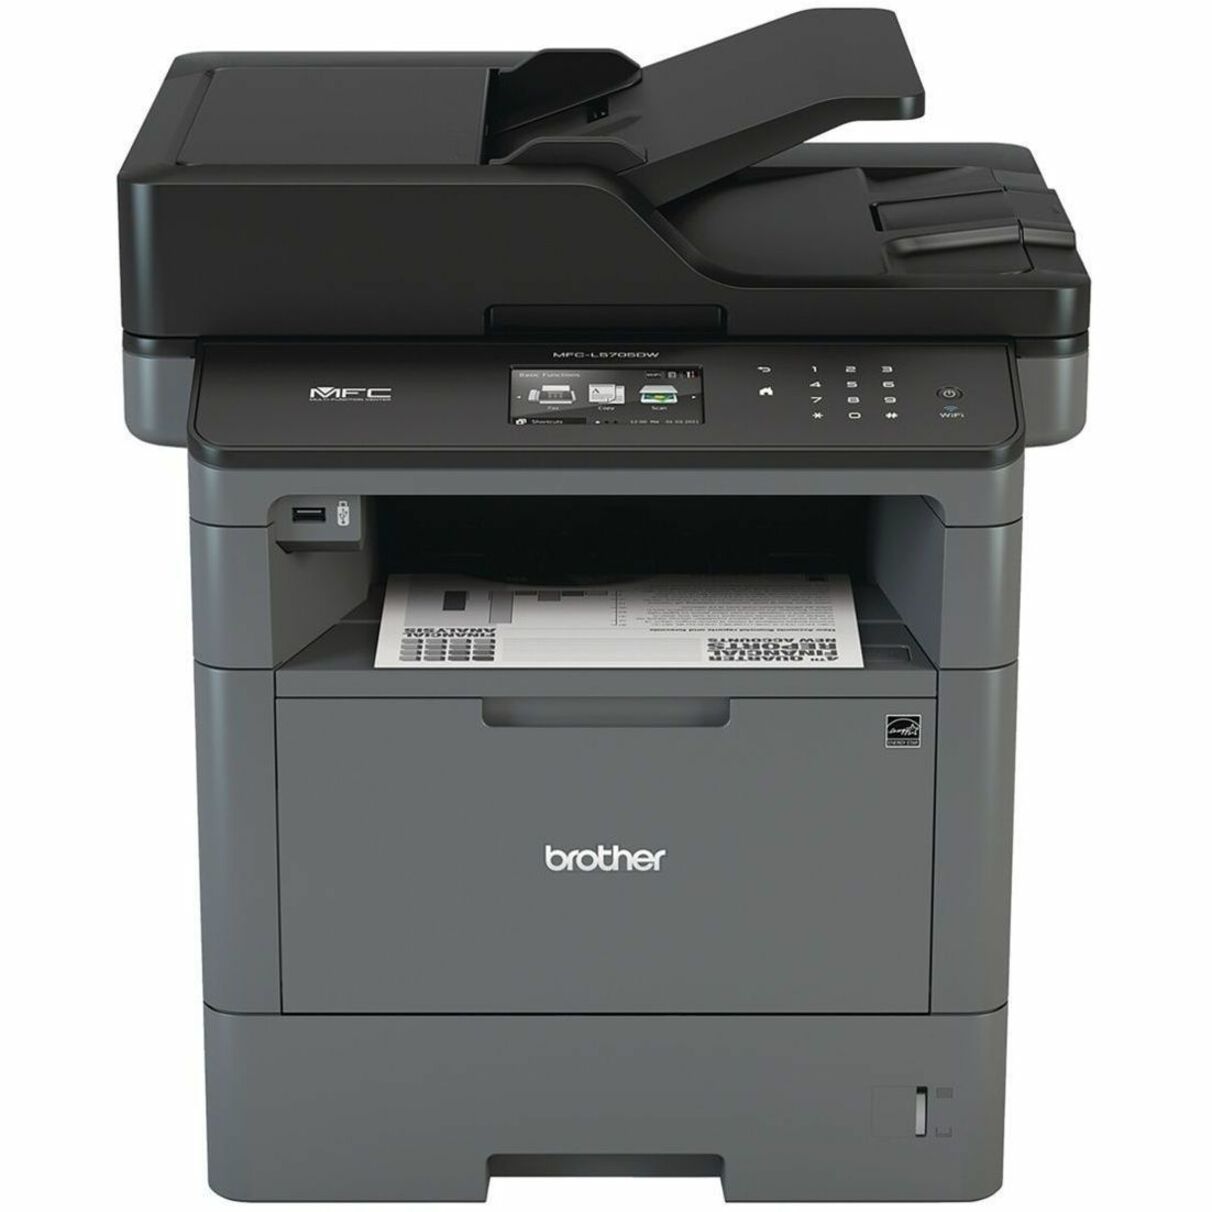 Brother MFCL5705DW MFC-L5705DW Business Monochrome Laser All-in-One Printer, Fax, Copier, Scanner, Wireless Printing